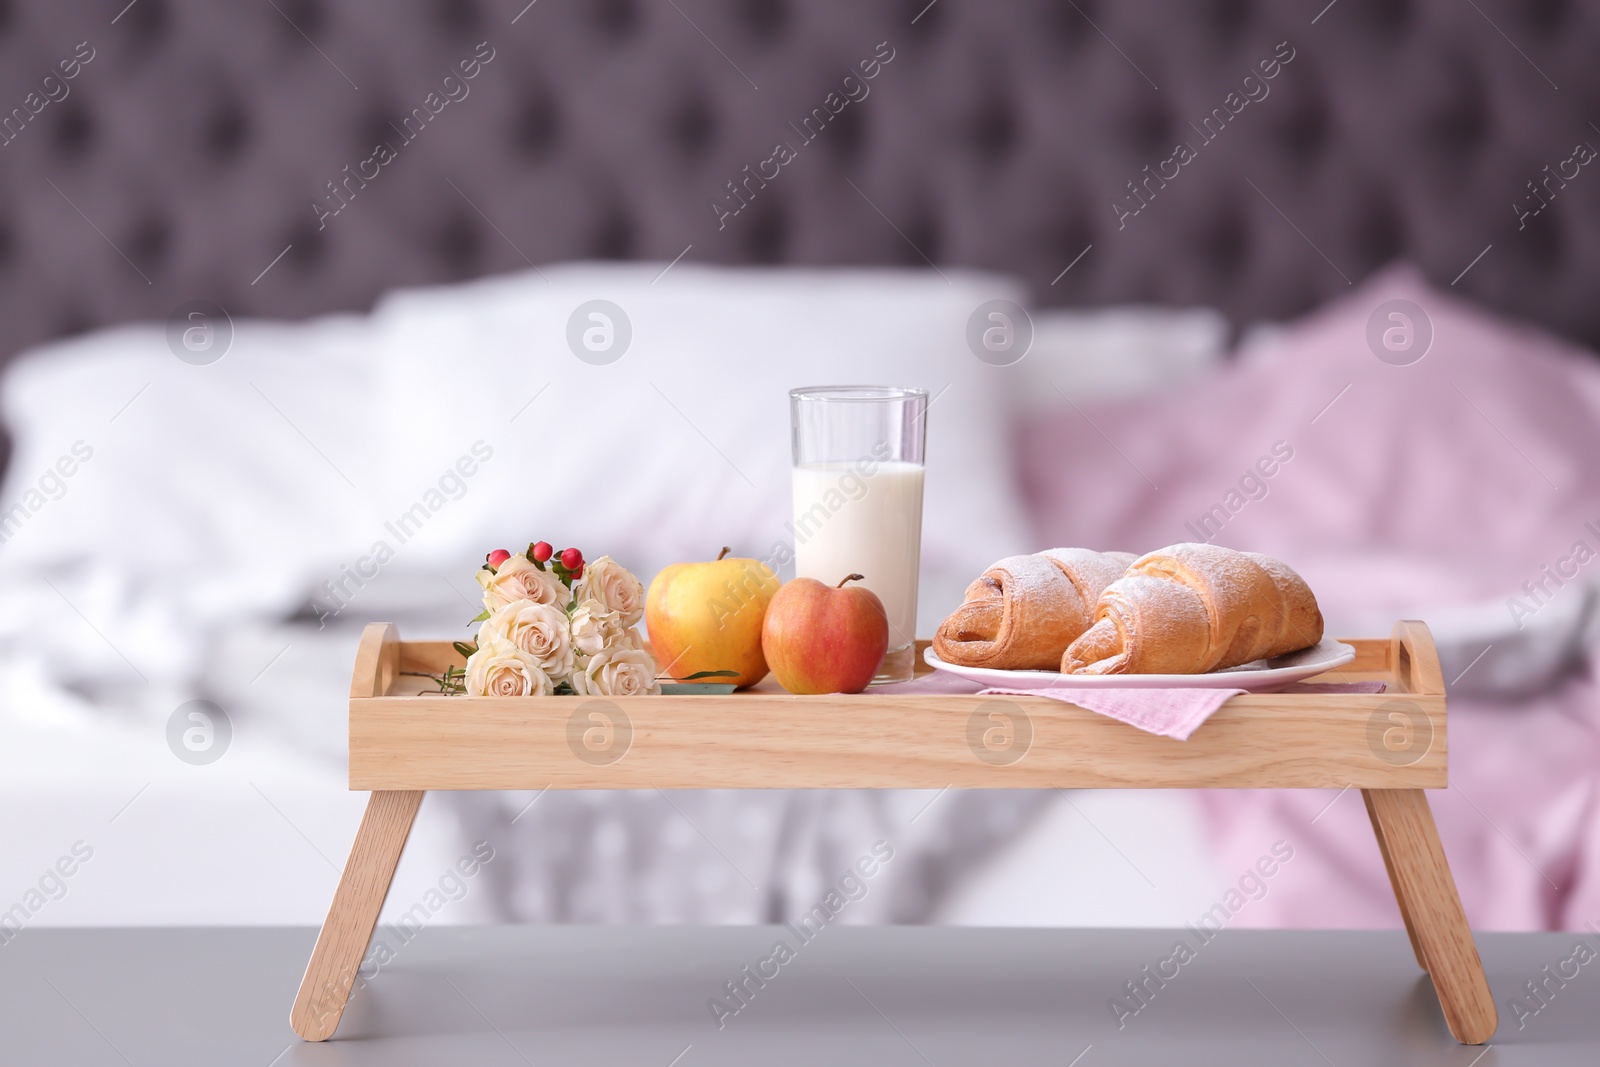 Photo of Tray with delicious croissants, milk and apples on table